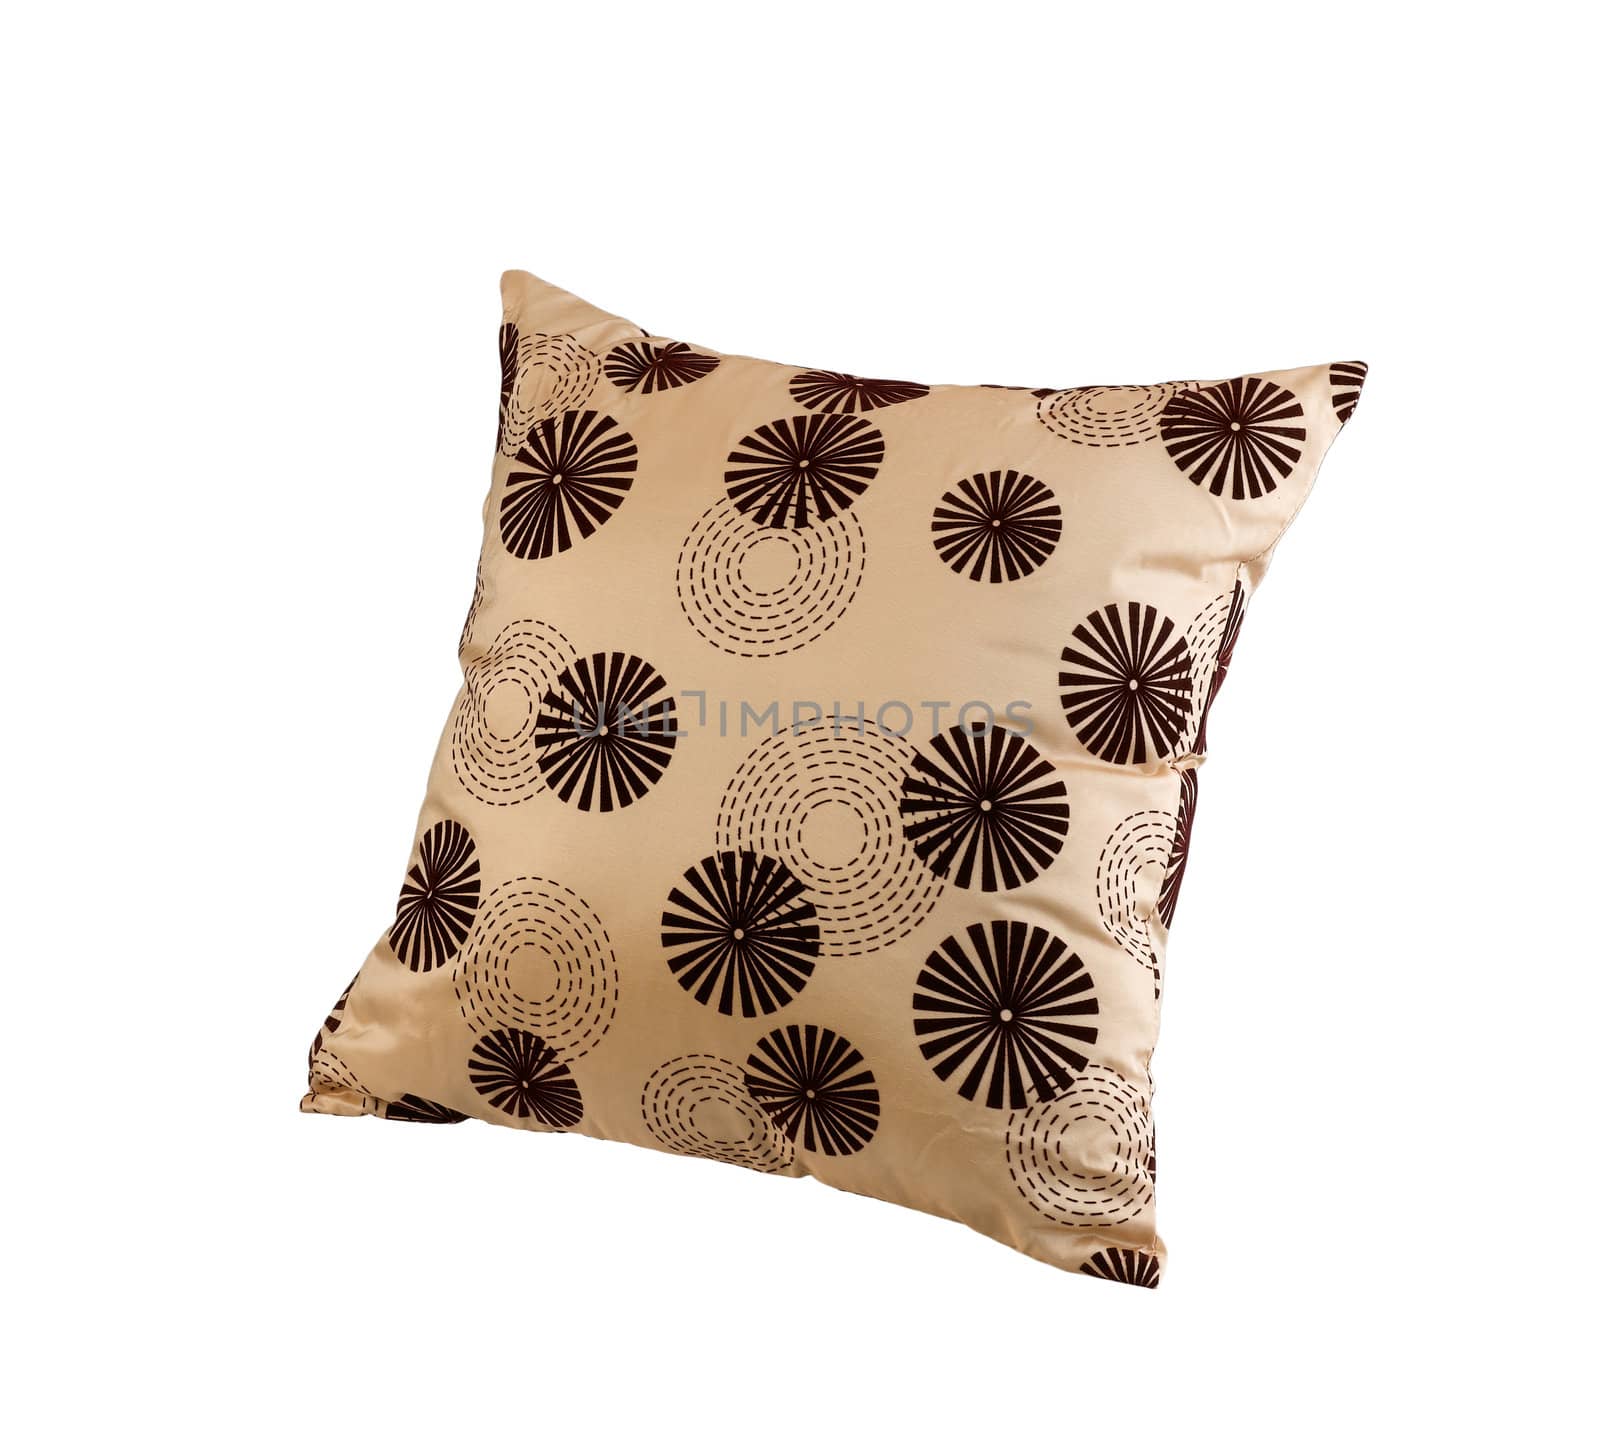 Beautiful light brown pillow in flower blossom pattern graphic design
